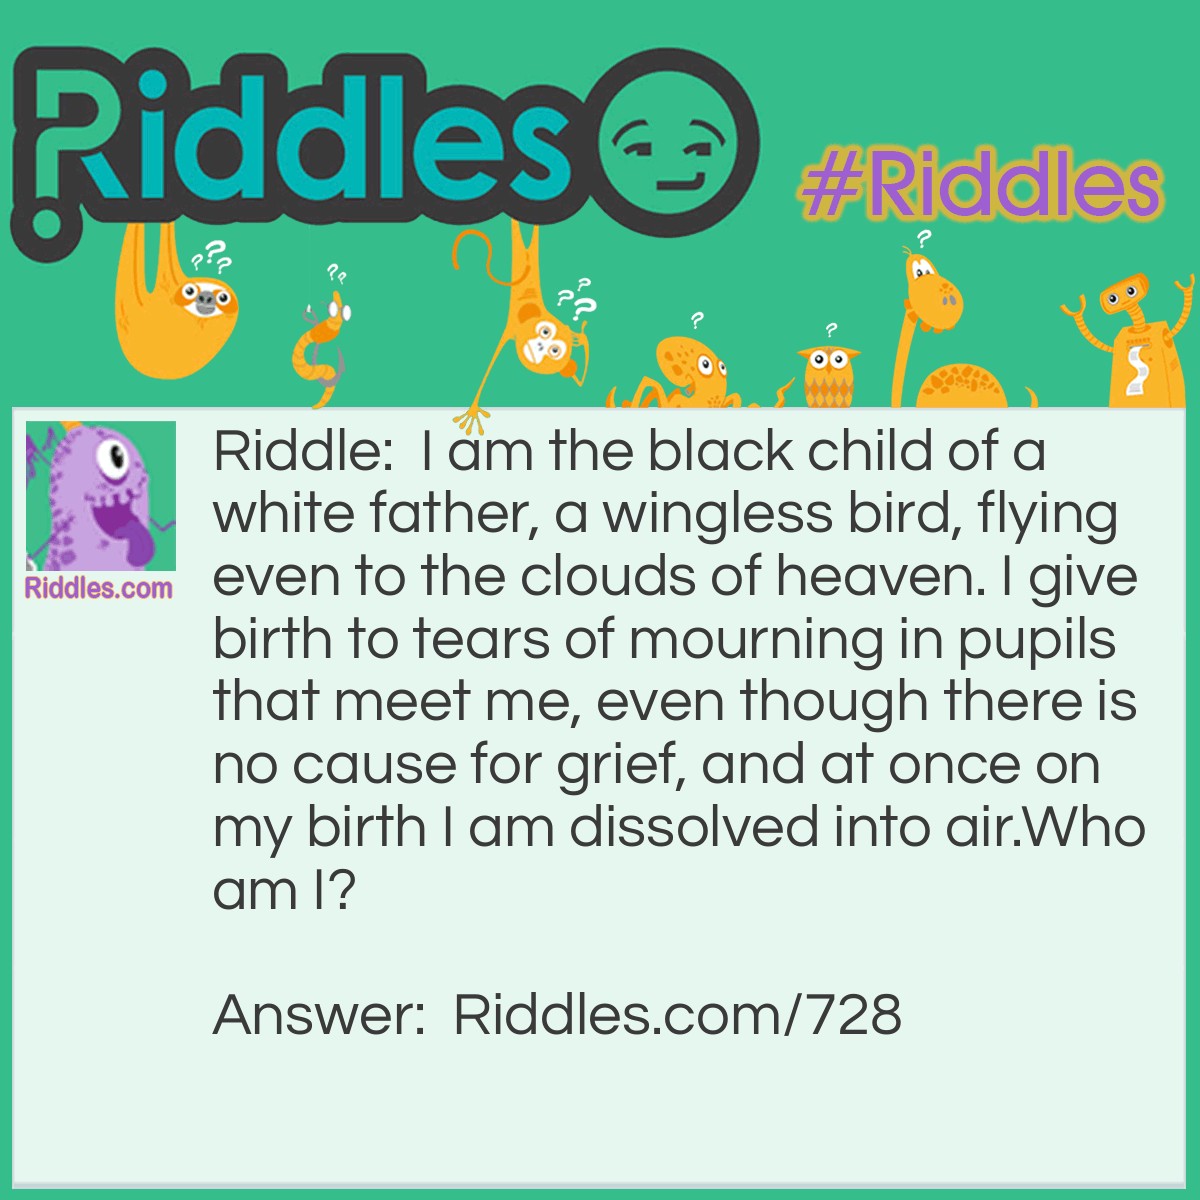 Riddle: I am the black child of a white father, a wingless bird, flying even to the clouds of heaven. I give birth to tears of mourning in pupils that meet me, even though there is no cause for grief, and at once on my birth, I am dissolved into air.
Who am I? Answer: I am Smoke.